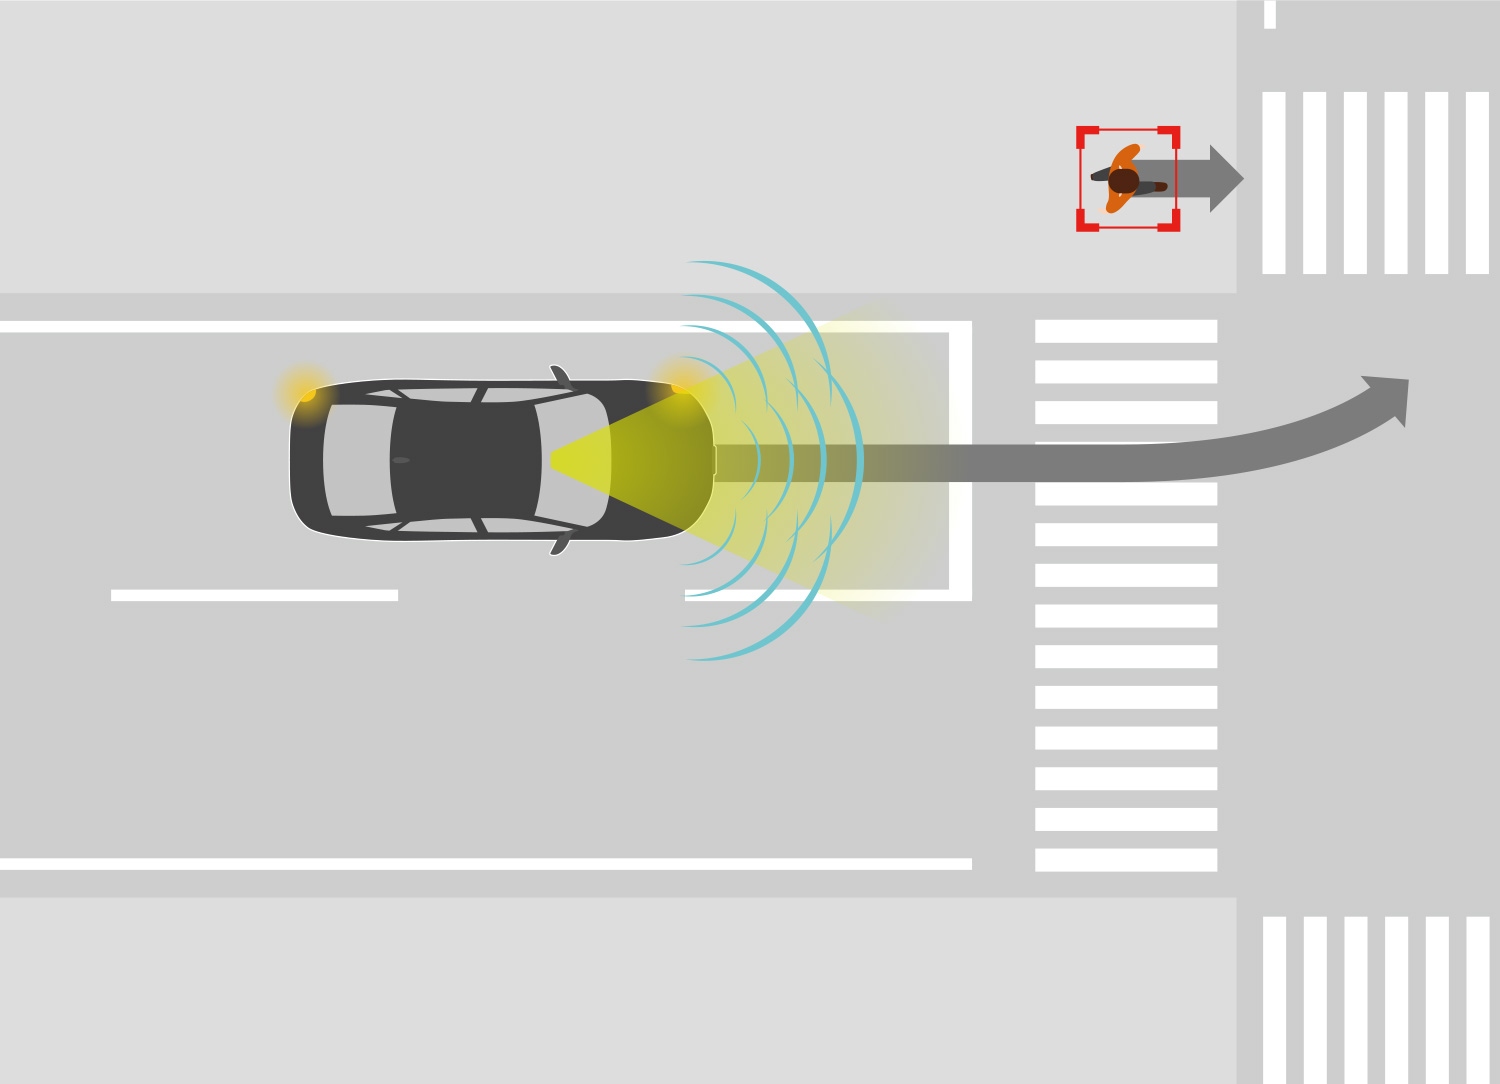 The system uses the camera and front radar to detect other vehicles and pedestrians.